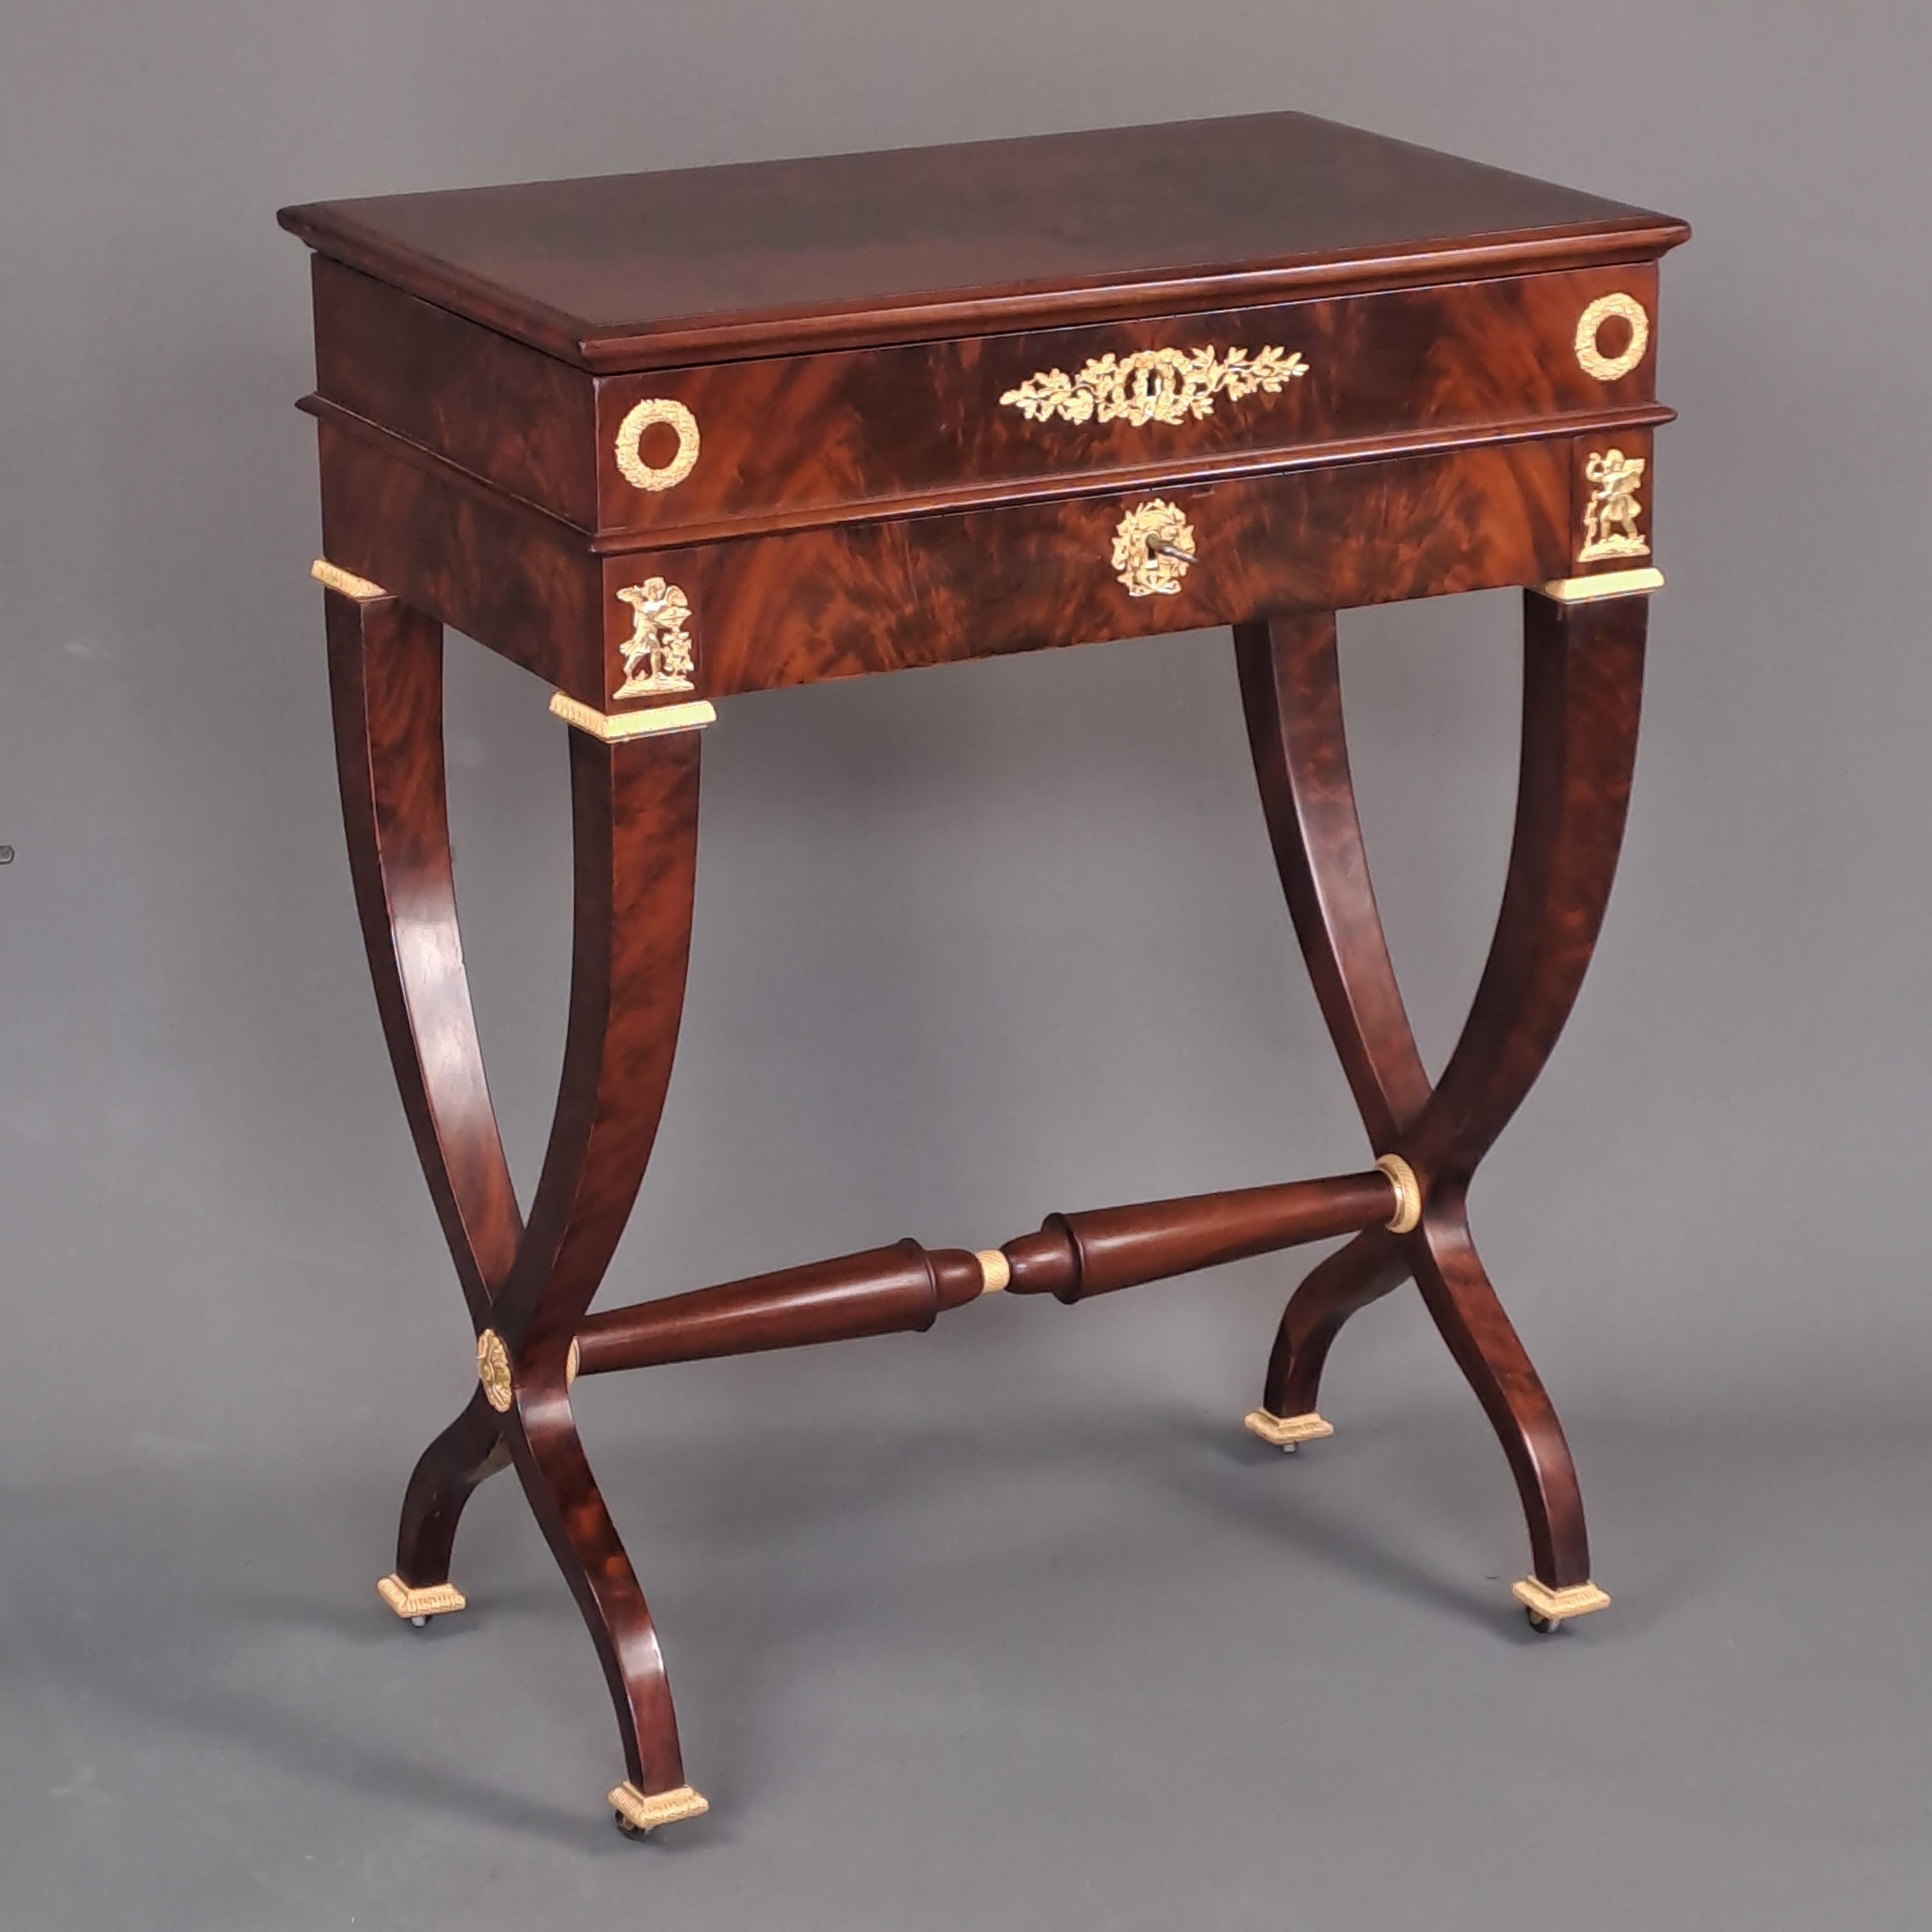 Empire period work table in flamed mahogany and gilt bronze mounted.
Magnificent table forming writing desk and work table. The drop-leaf top features a recessed mirror, storage compartments, as well as a removable candle holder and pin